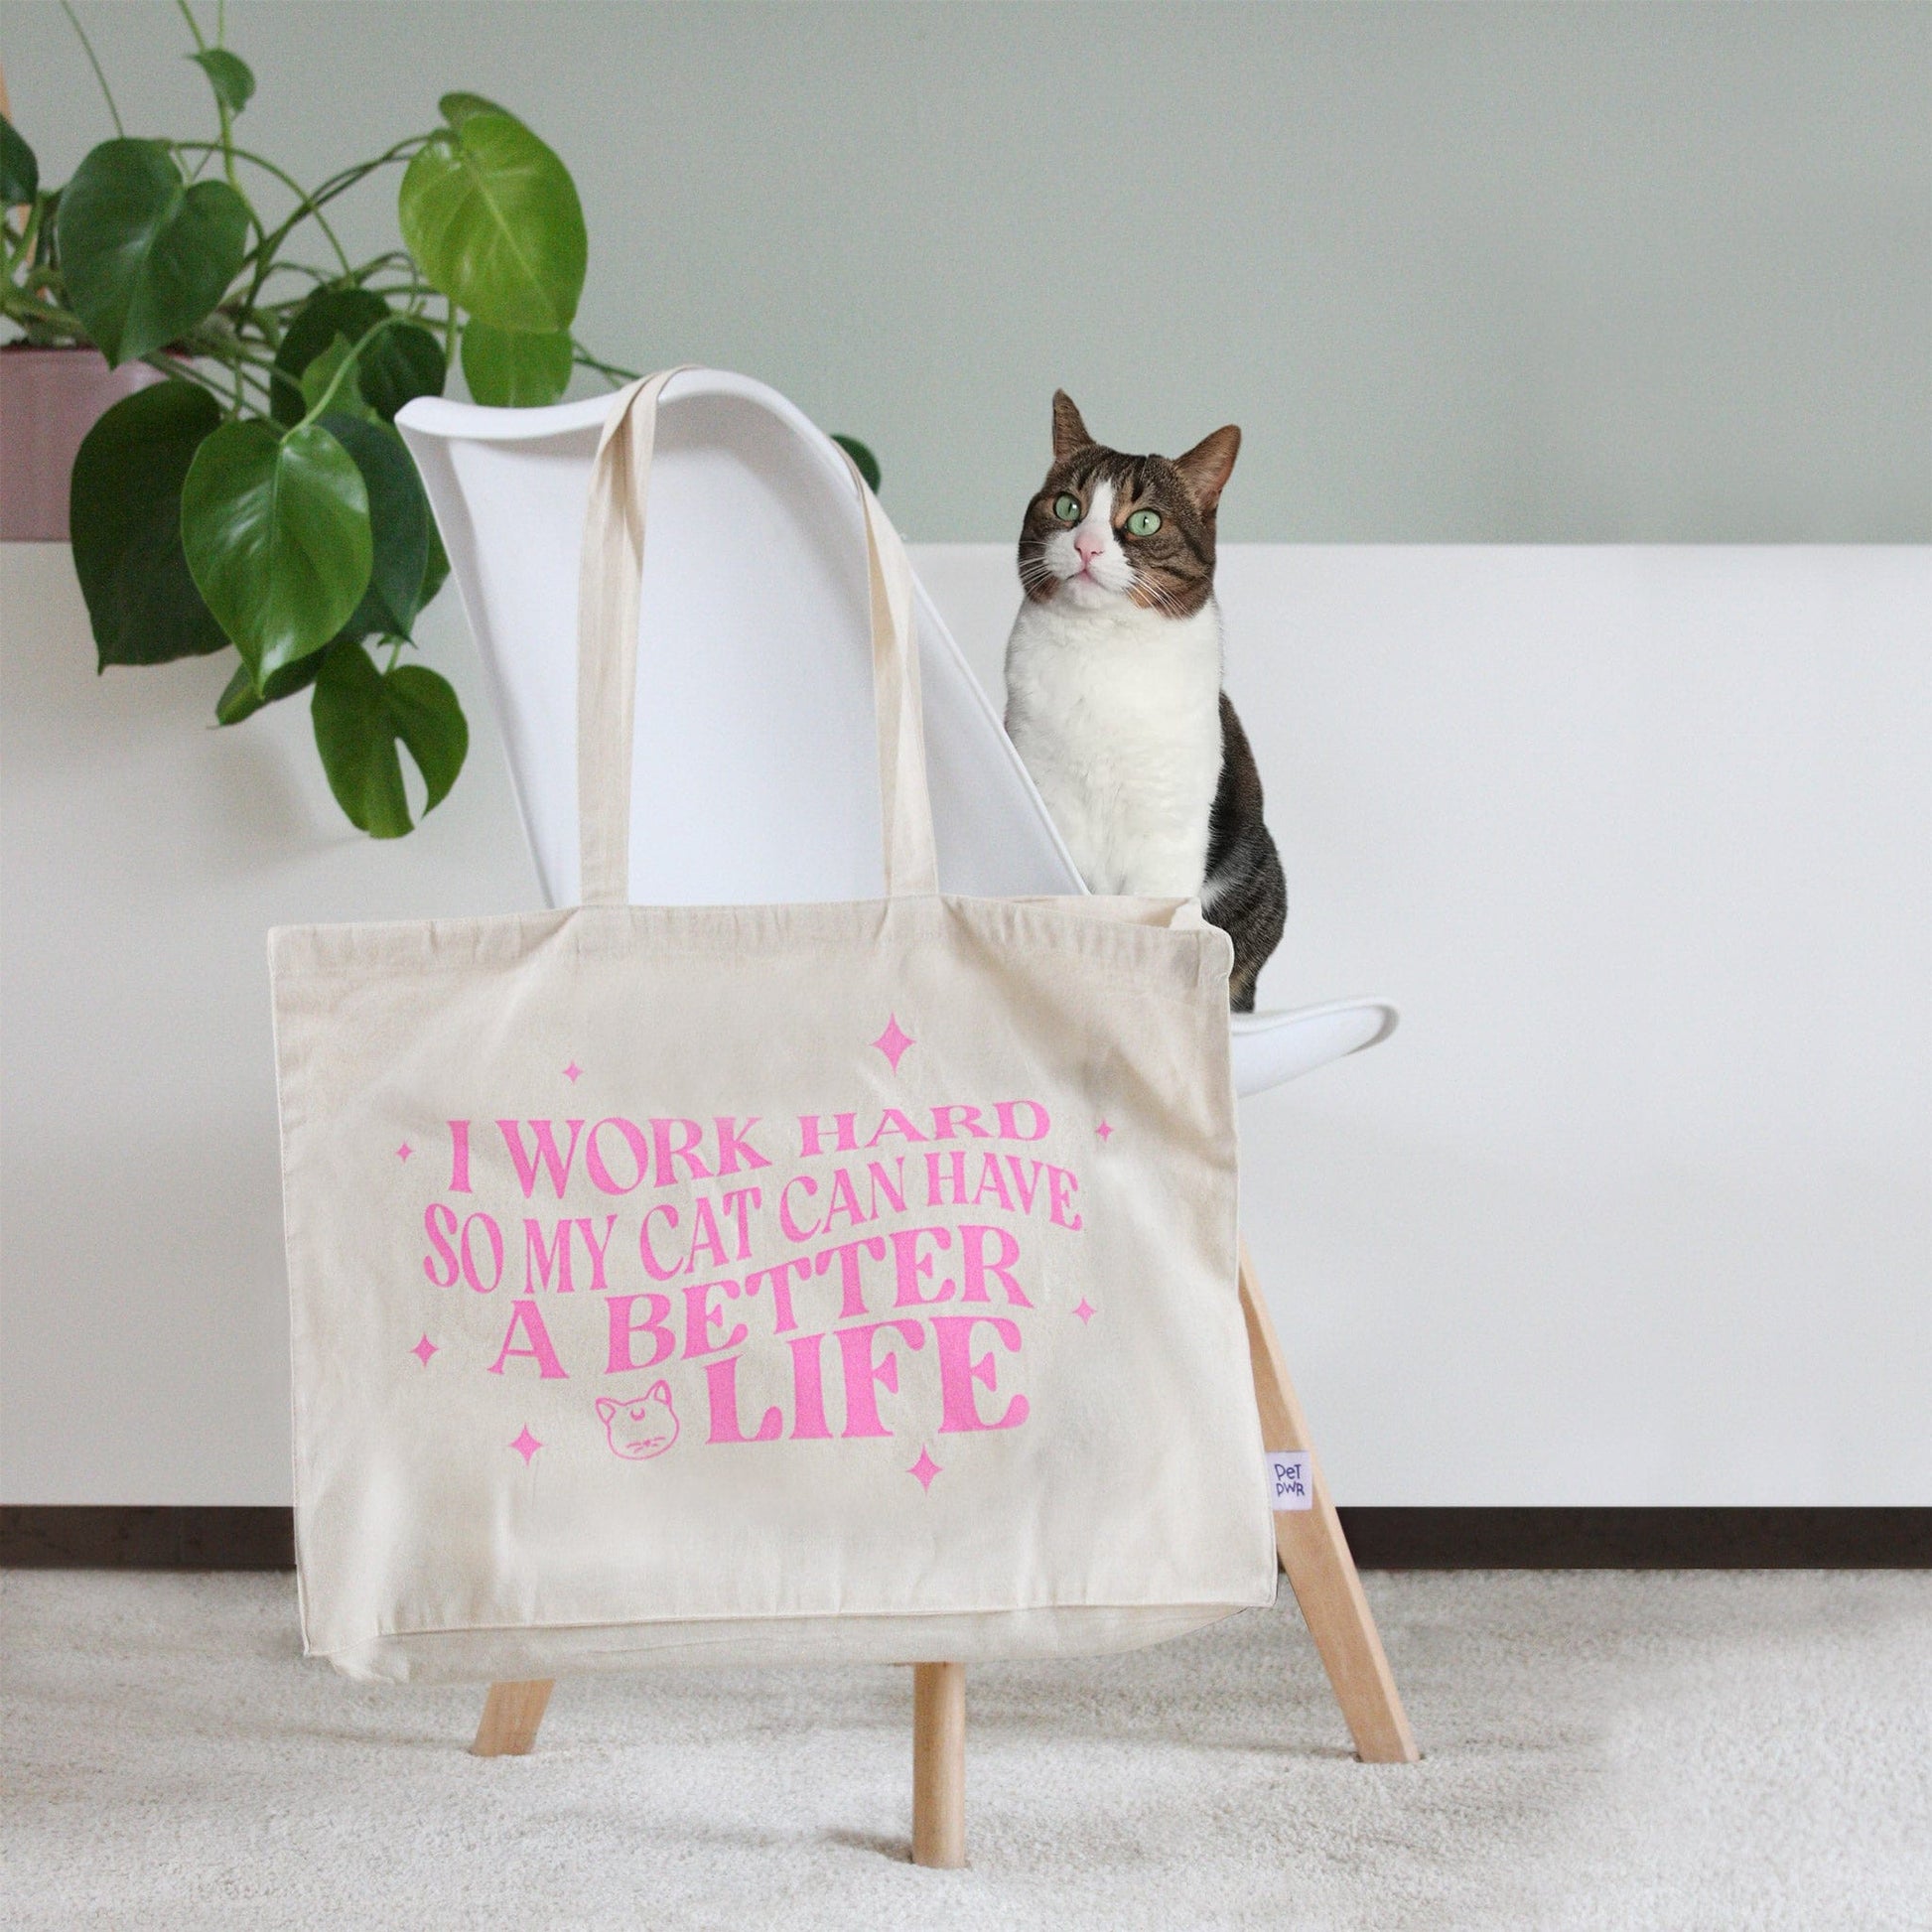 Maxi bag" I work hard so my cat can have a better life" 🐈